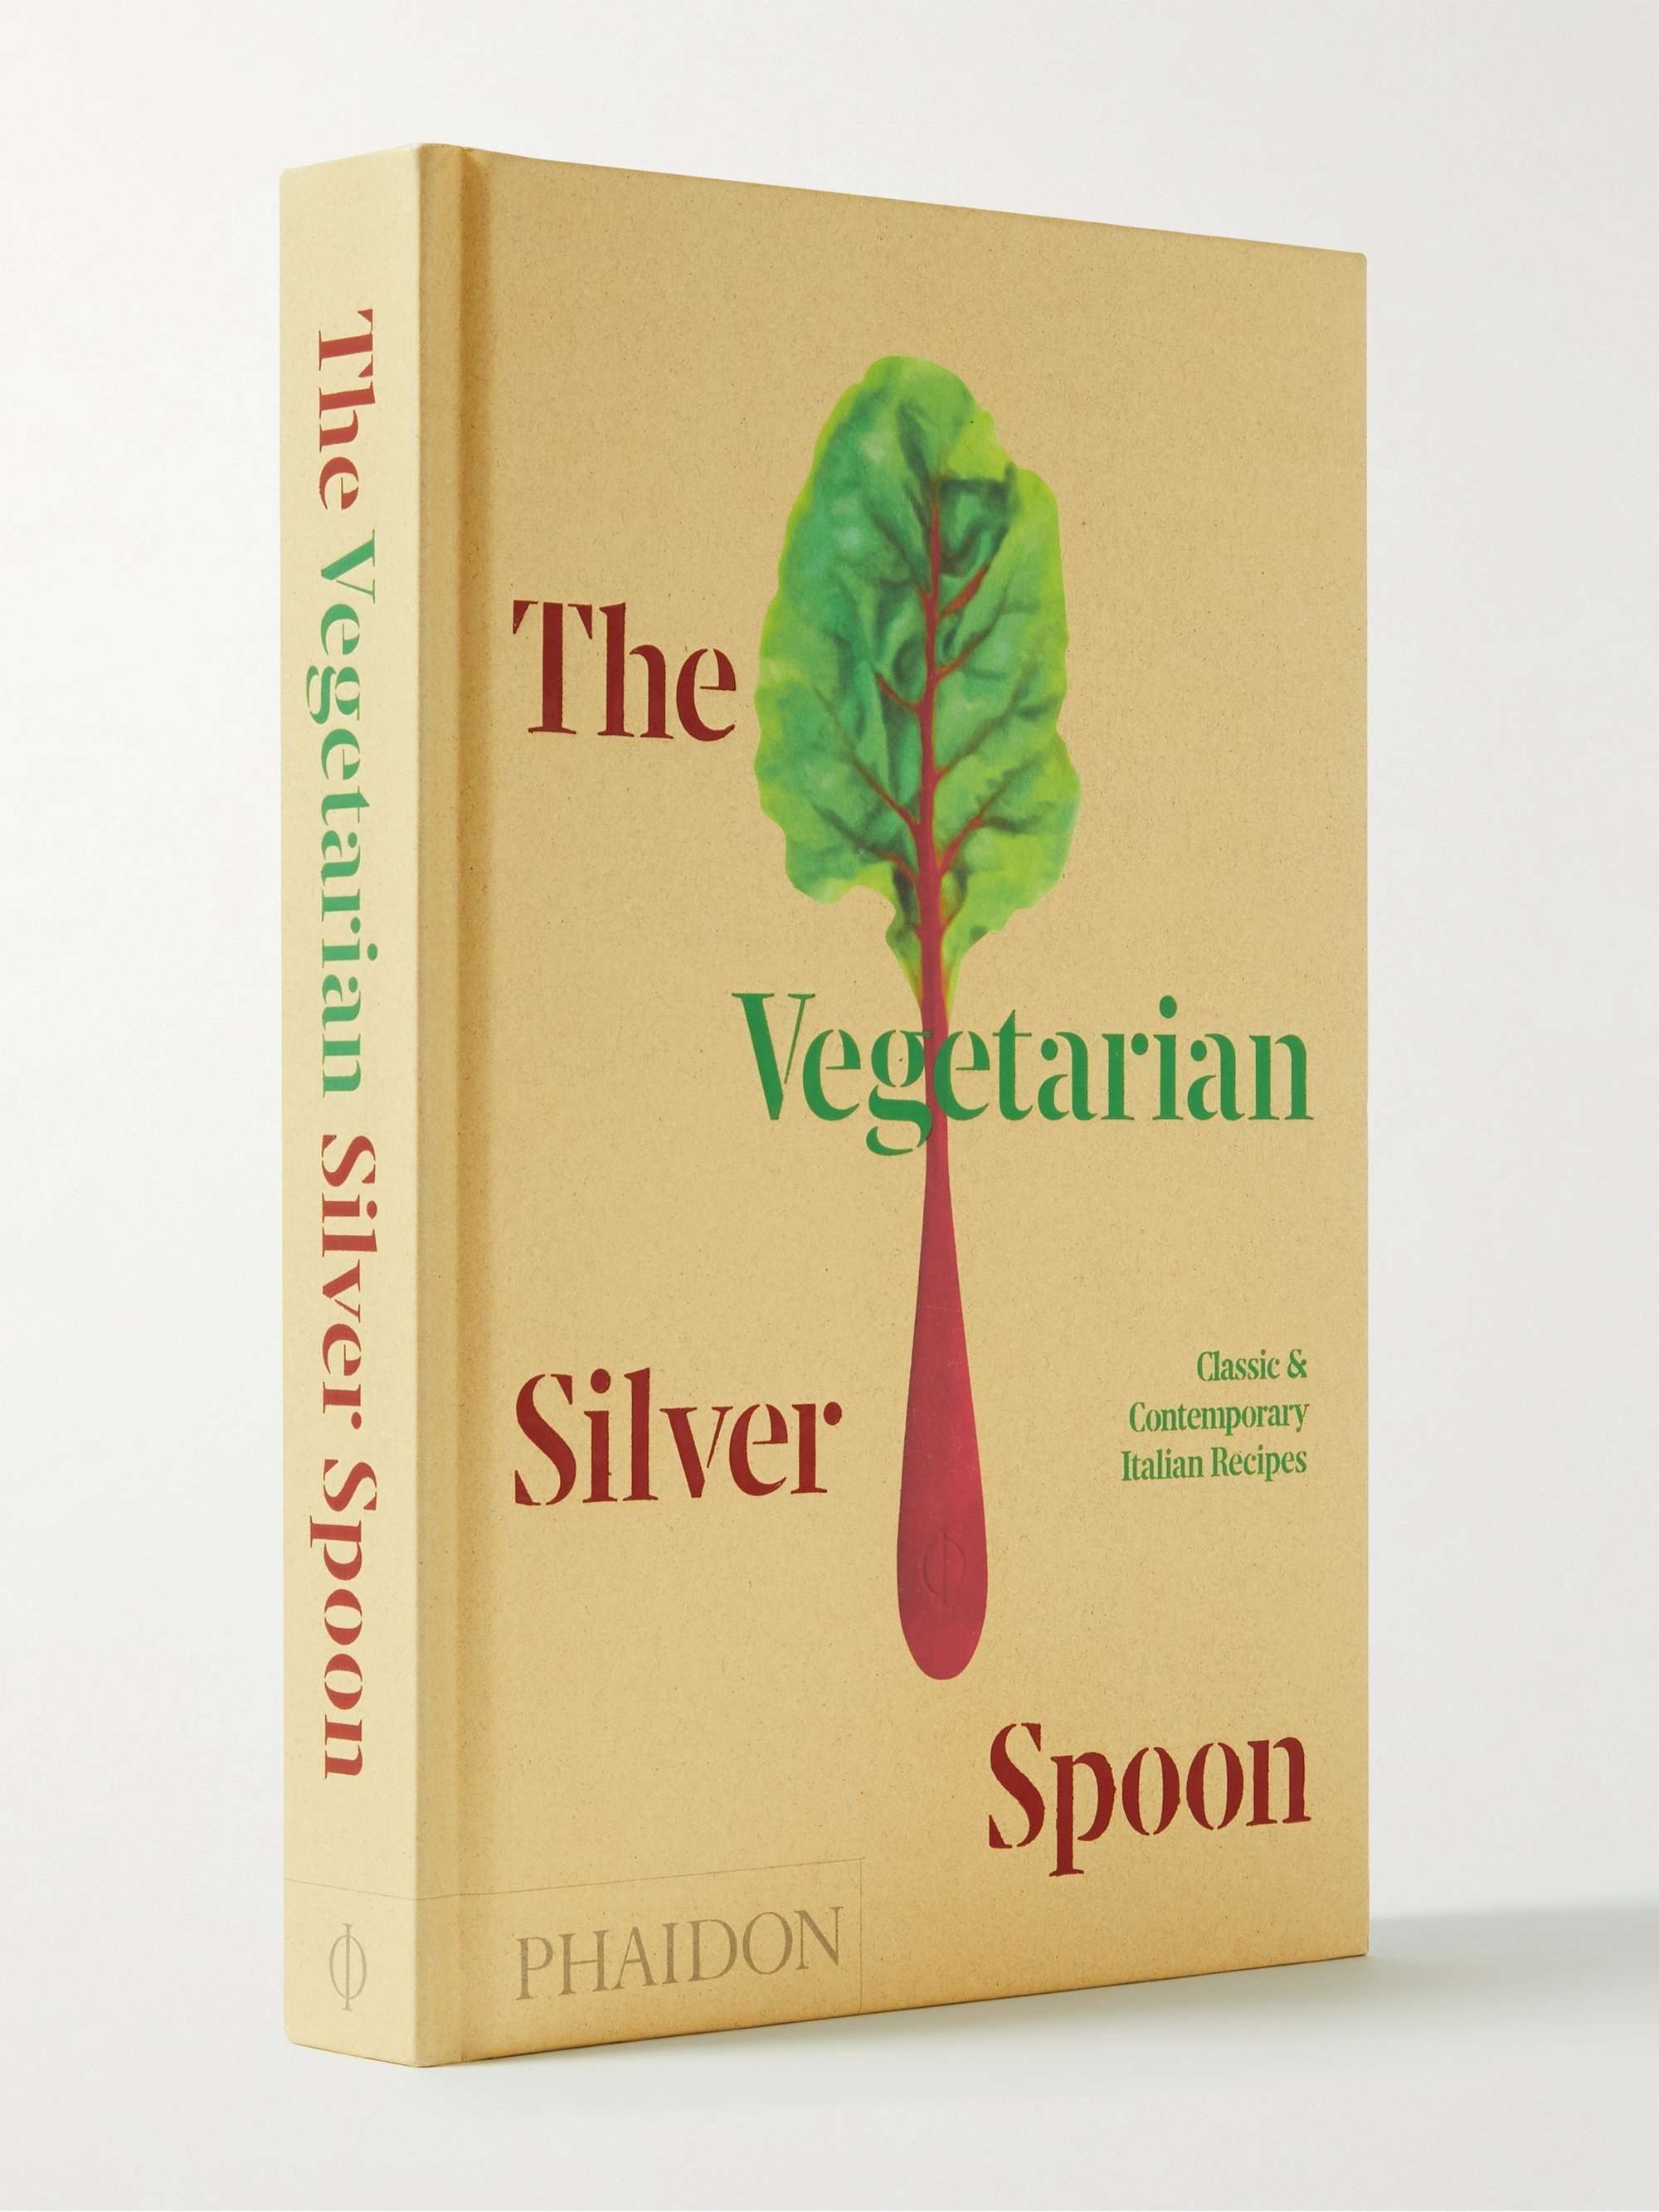 PHAIDON The Vegetarian Silver Spoon: Classic and Contemporary Italian Recipes Hardcover Cookbook